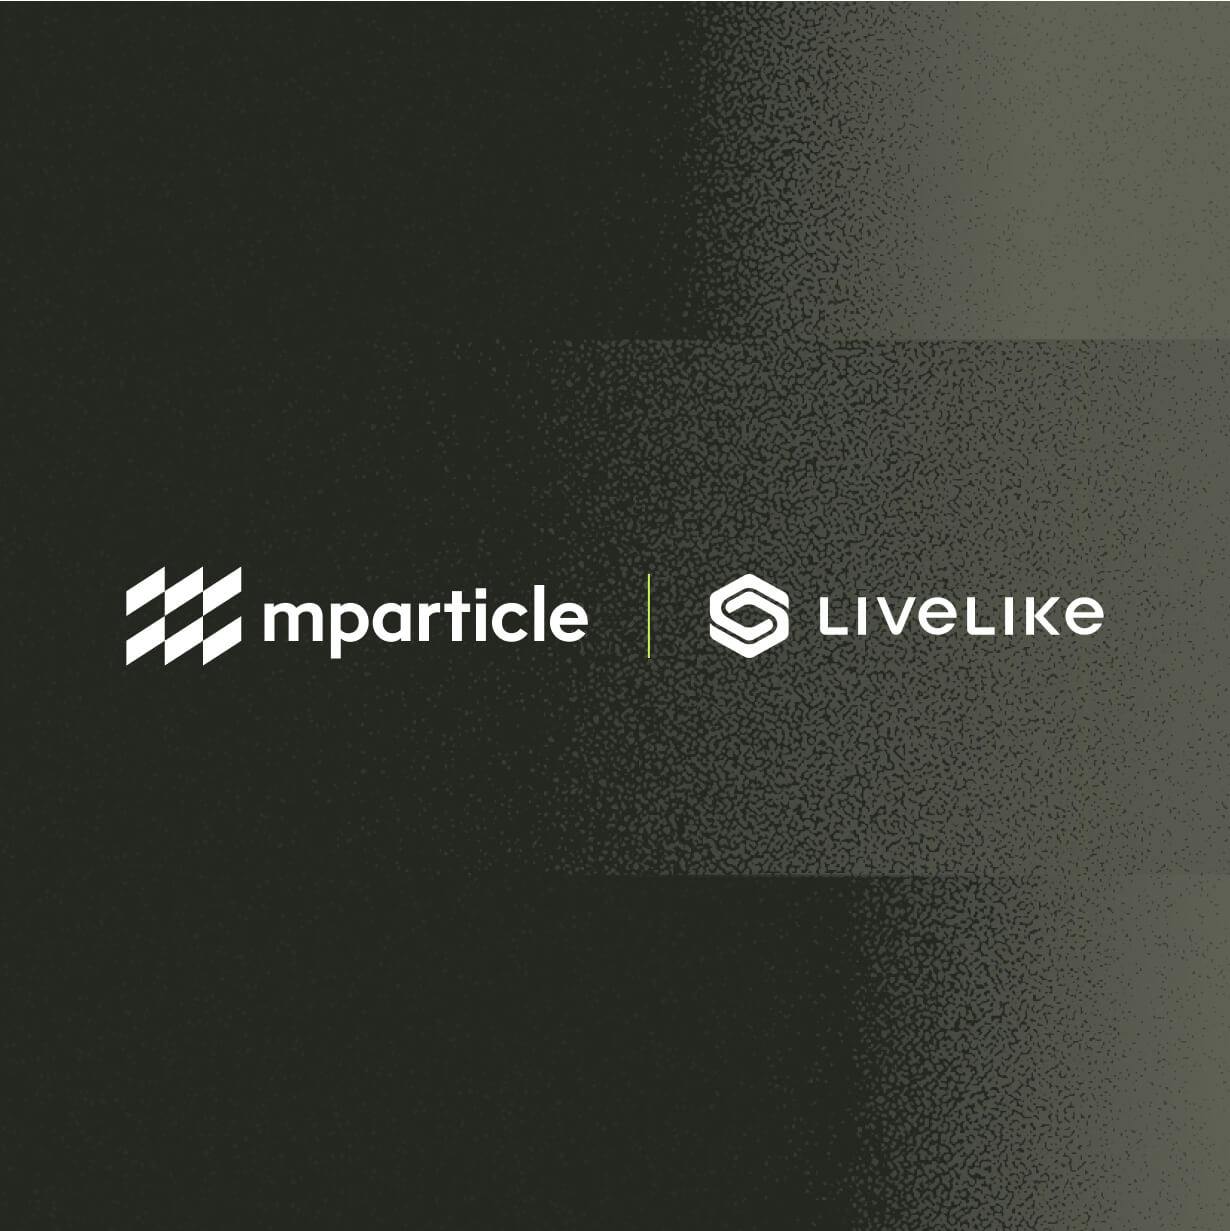 Increase user engagement by 2.5x with the mParticle Livelike integration